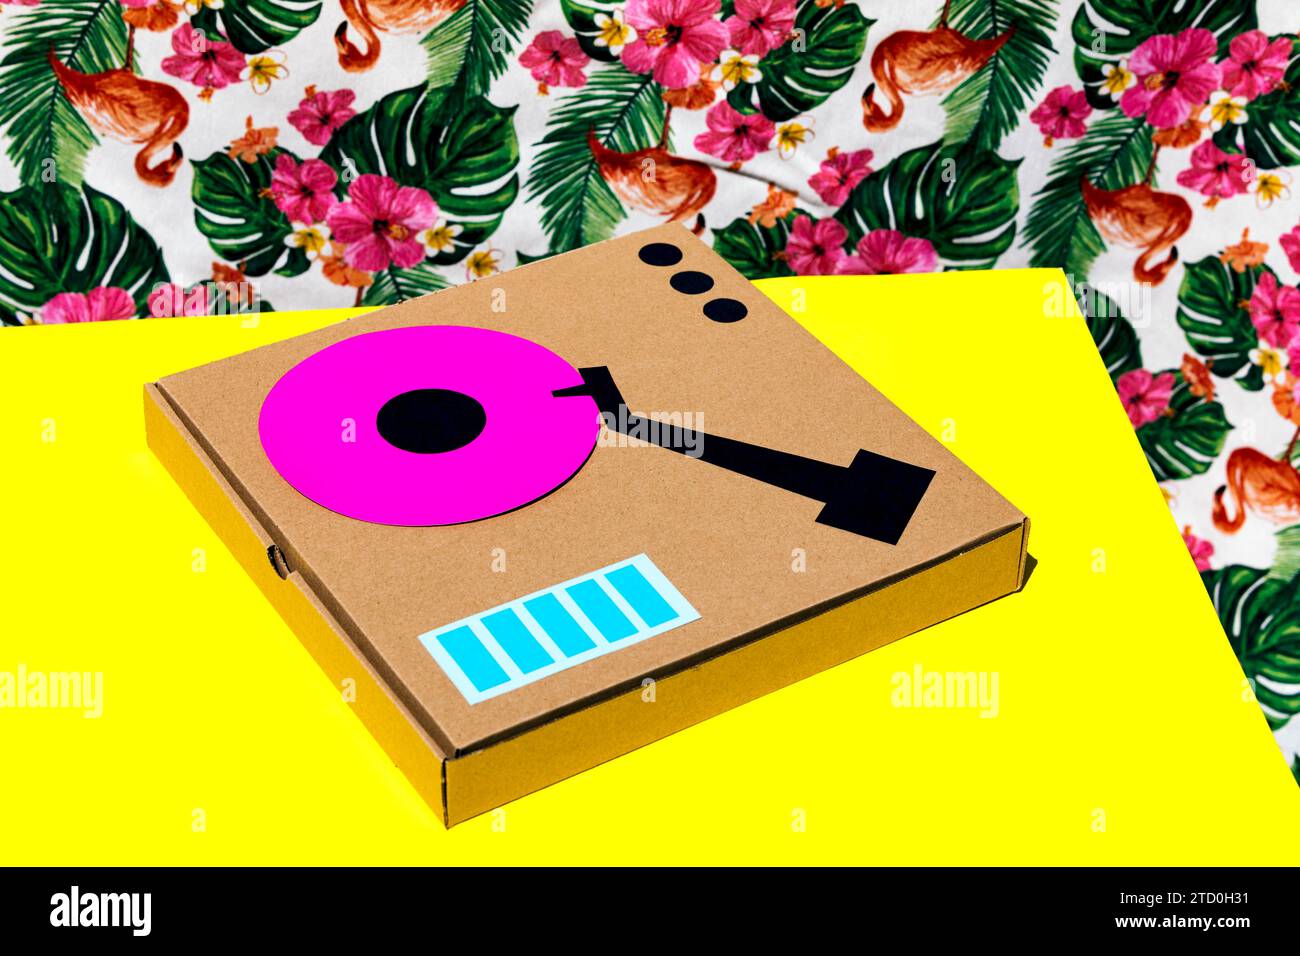 Antique turntable made with cardboard box on yellow table over floral background Stock Photo